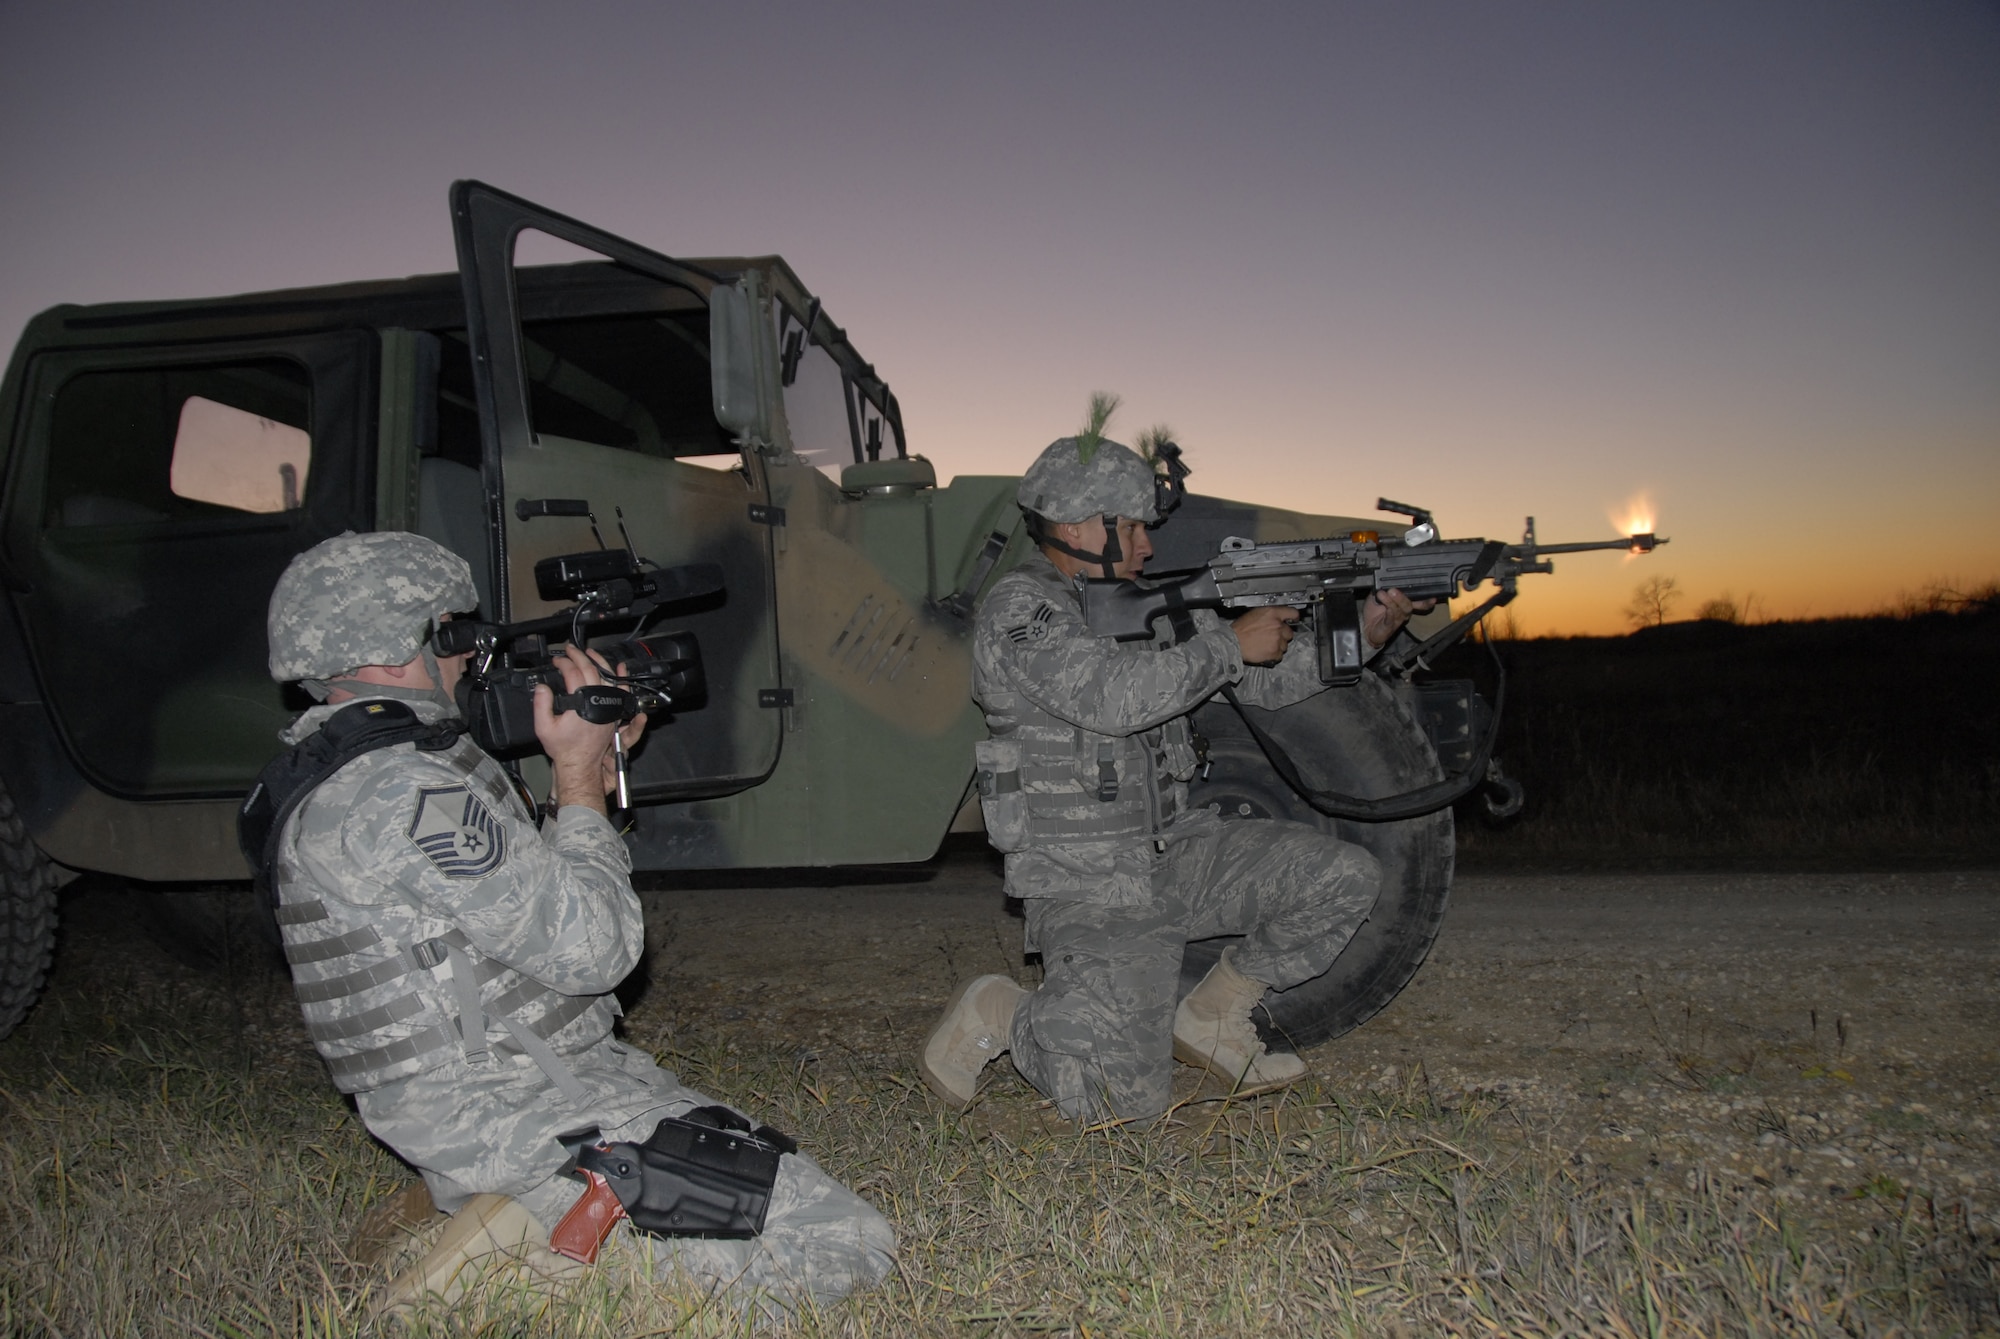 Master Sgt. Dan Richardson (left), broadcaster with the 115th Fighter Wing in Madison, Wis., videotapes as Senior Airmen Nathan Ortiz engages in a firefight during a Security Forces exercise at Volk Field Combat Readiness Training Center Nov. 7, 2009. Three public affairs personnel from the 115th embedded with SF to learn how to effectively operate under the pressures of a combat environment.  The training proved beneficial to both sides as SF members learned ways to protect embedded assets while performing their regular duties.  (U.S. Air Force Photo by Tech. Sgt. Don Nelson)